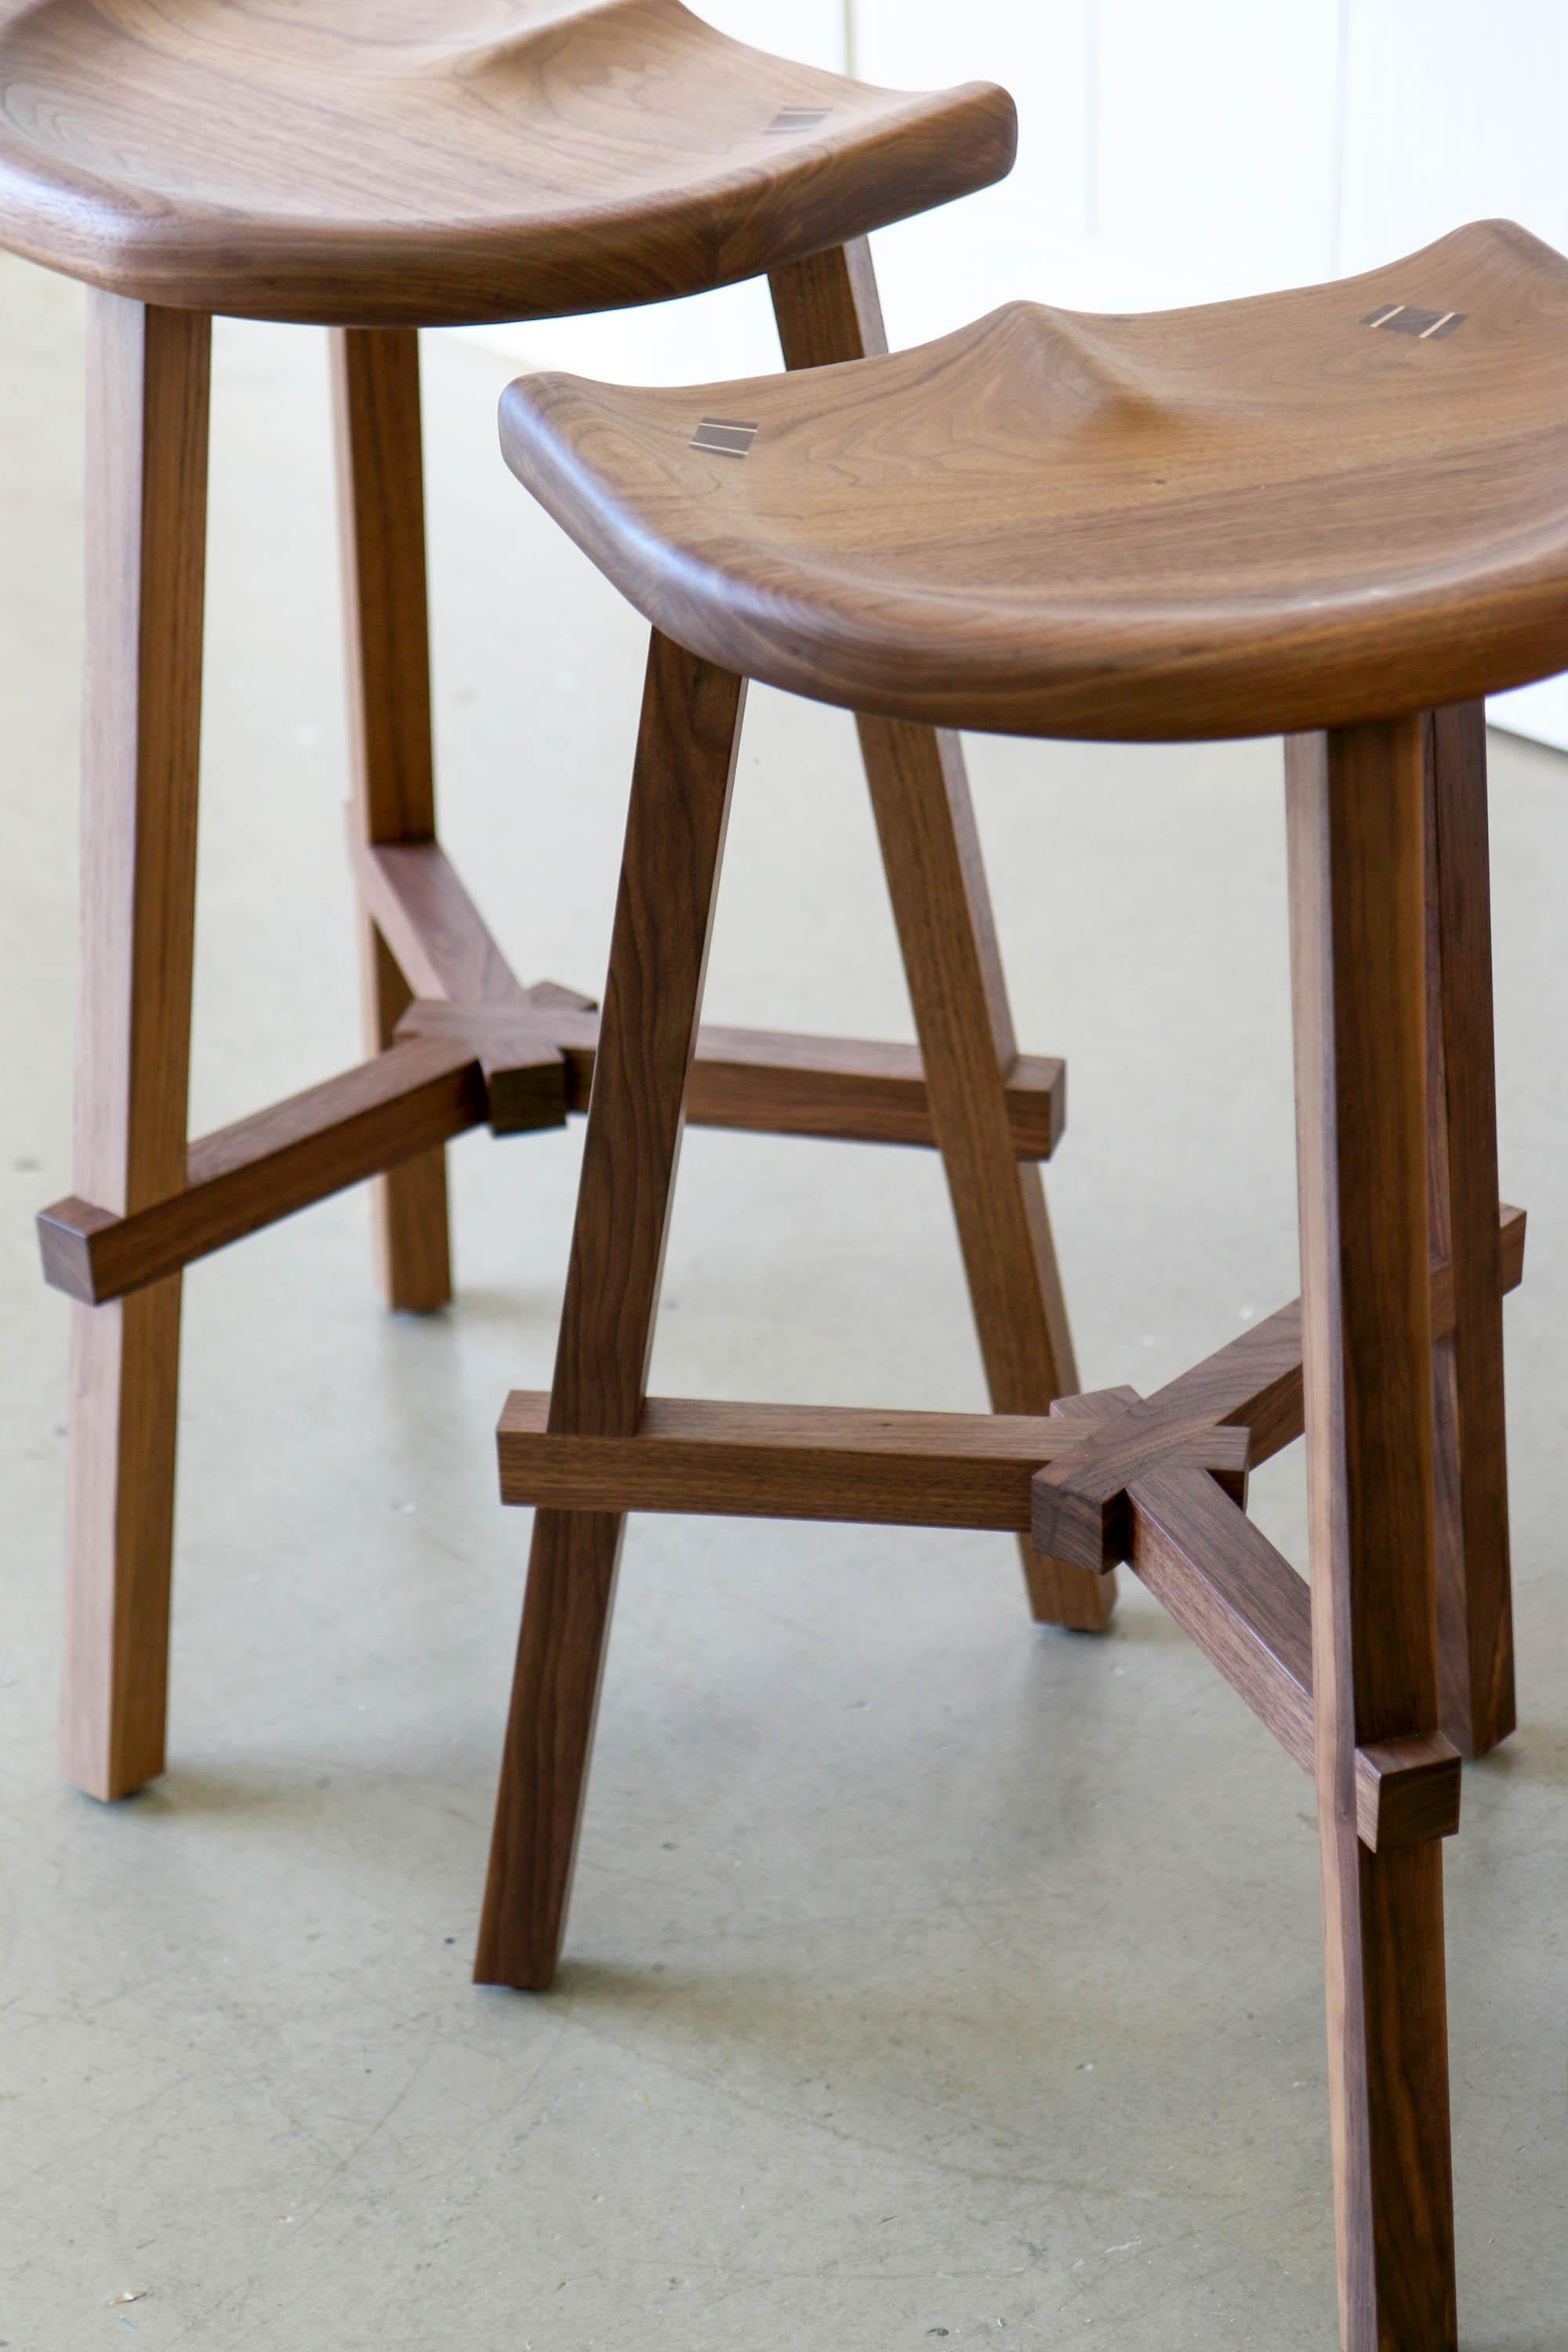 Designed with functionalism and elegance in mind, the Conti Wooden Kitchen Stool delivers both making it the perfect addition to your kitchen island or home bar. 

This elegant counter stool has a hand-crafted seat that moulds to the shape of the